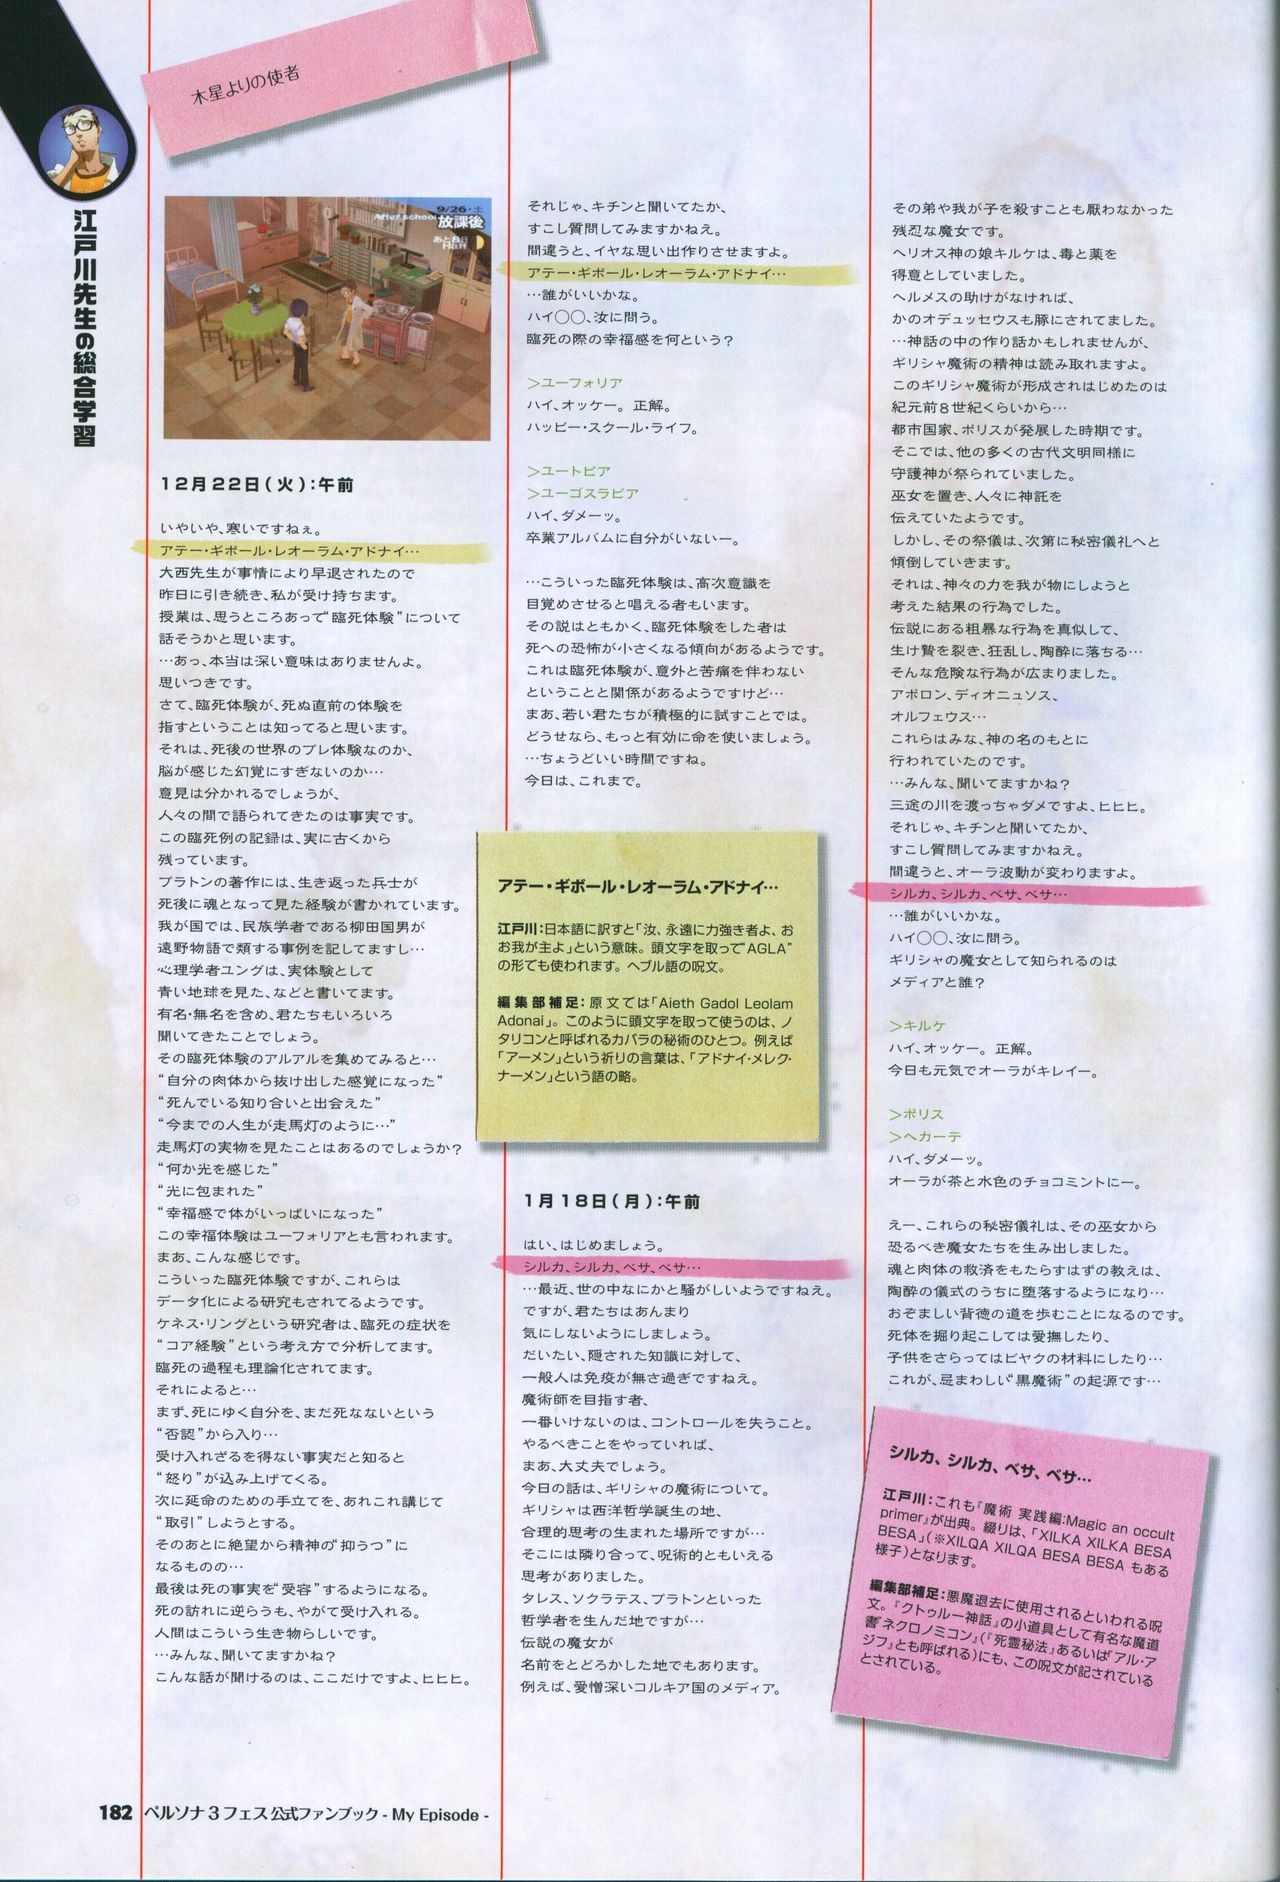 Persona 3 Fes Official Fan Book -My Episode- 183